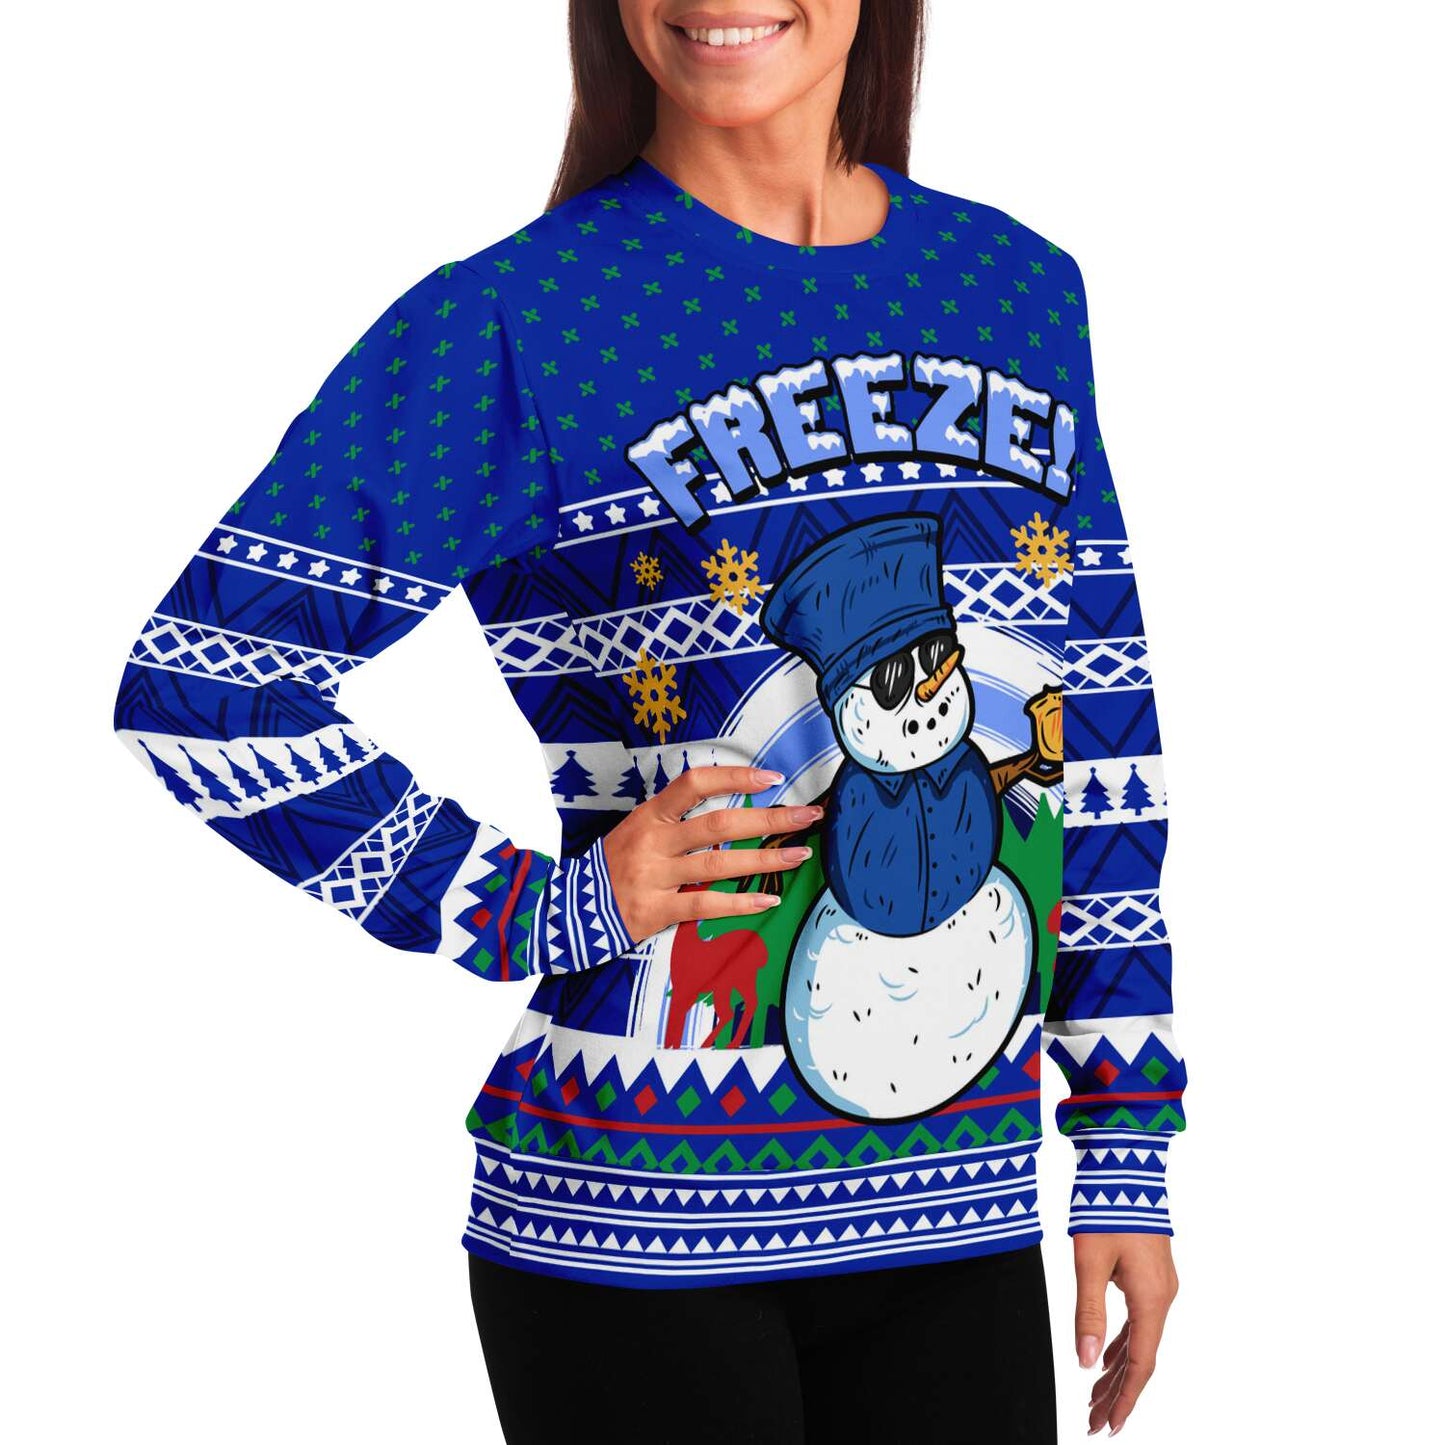 Snowman Ugly Christmas Sweater, Blue Police Freeze Snow Funny Tacky Winter Print Party Sweatshirt Holiday Men Women Christmas Gift Plus Size Starcove Fashion